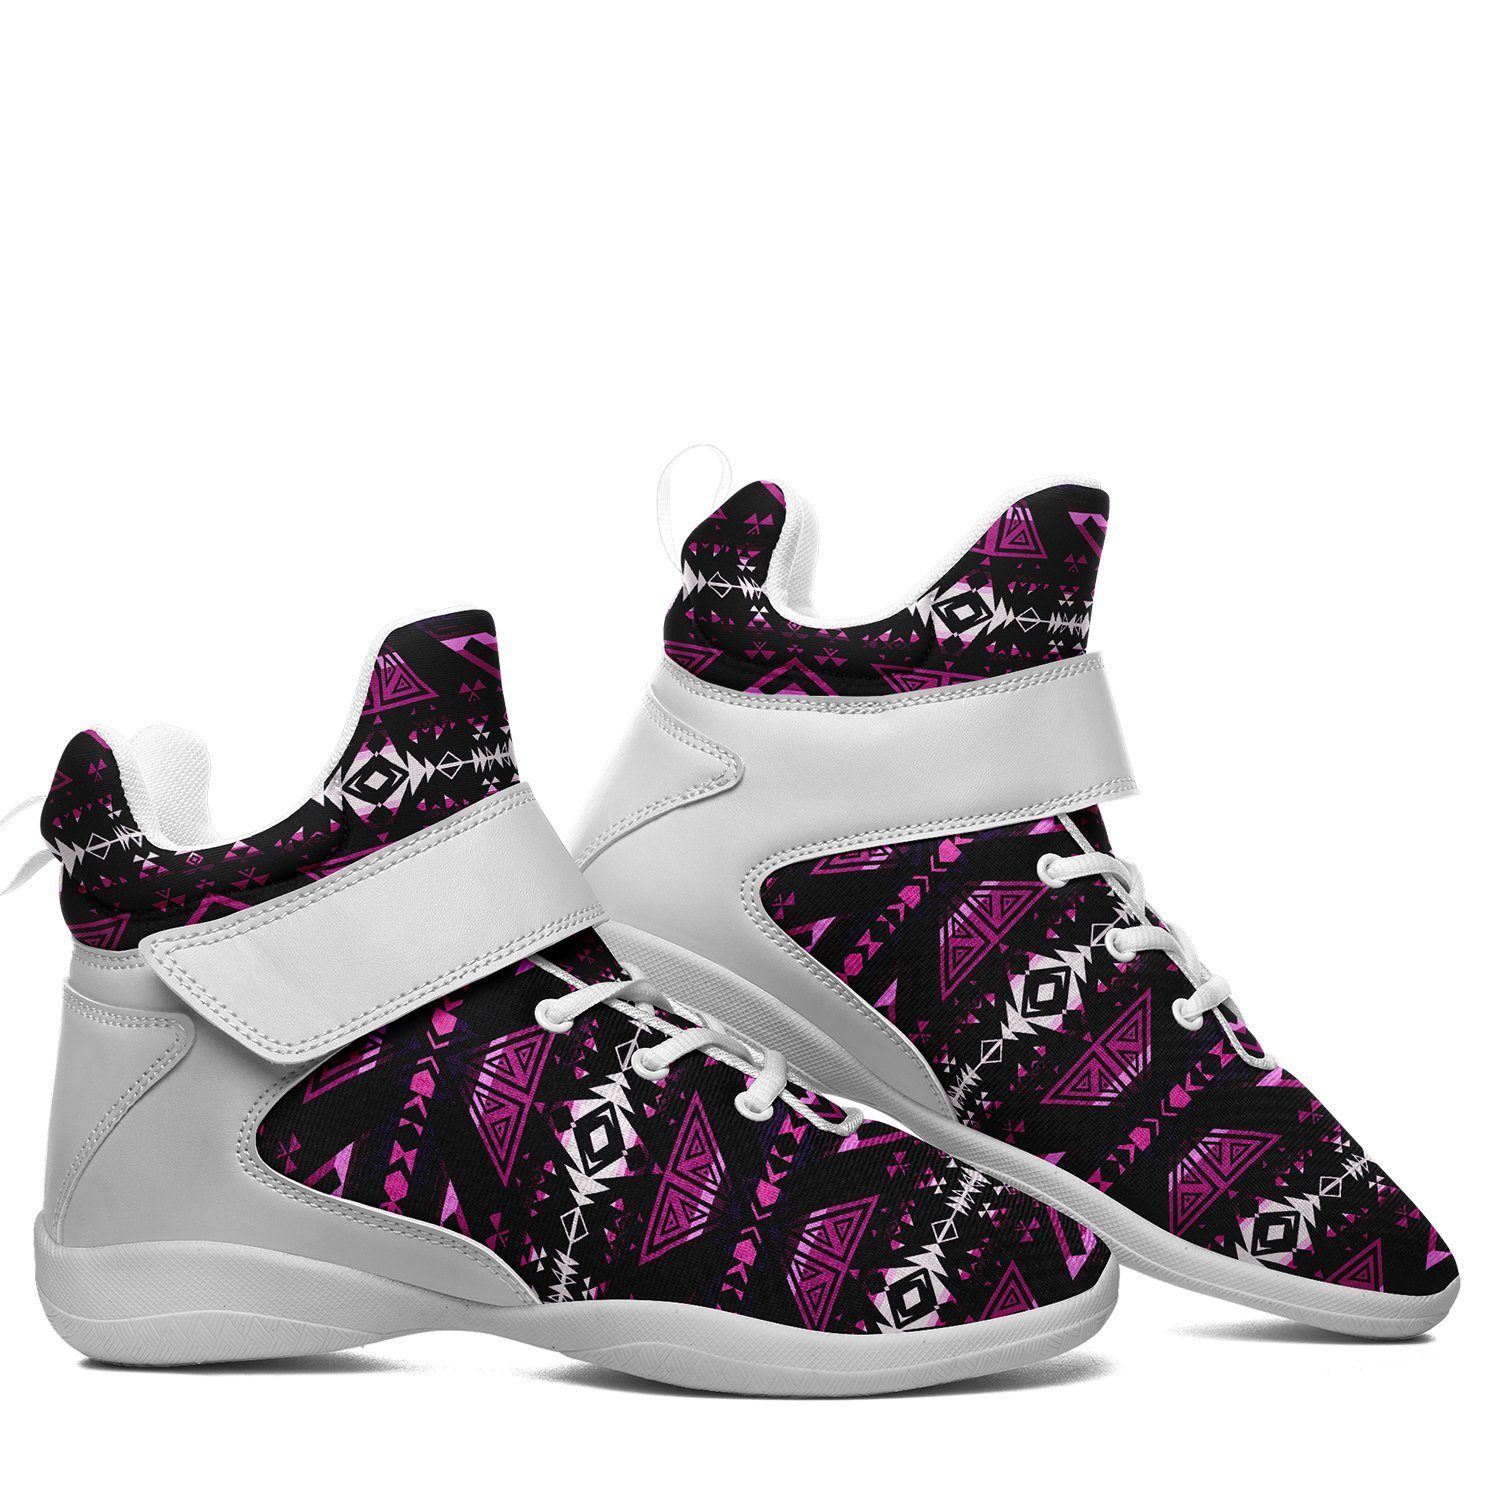 Upstream Expedition Moonlight Shadows Ipottaa Basketball / Sport High Top Shoes - White Sole 49 Dzine 